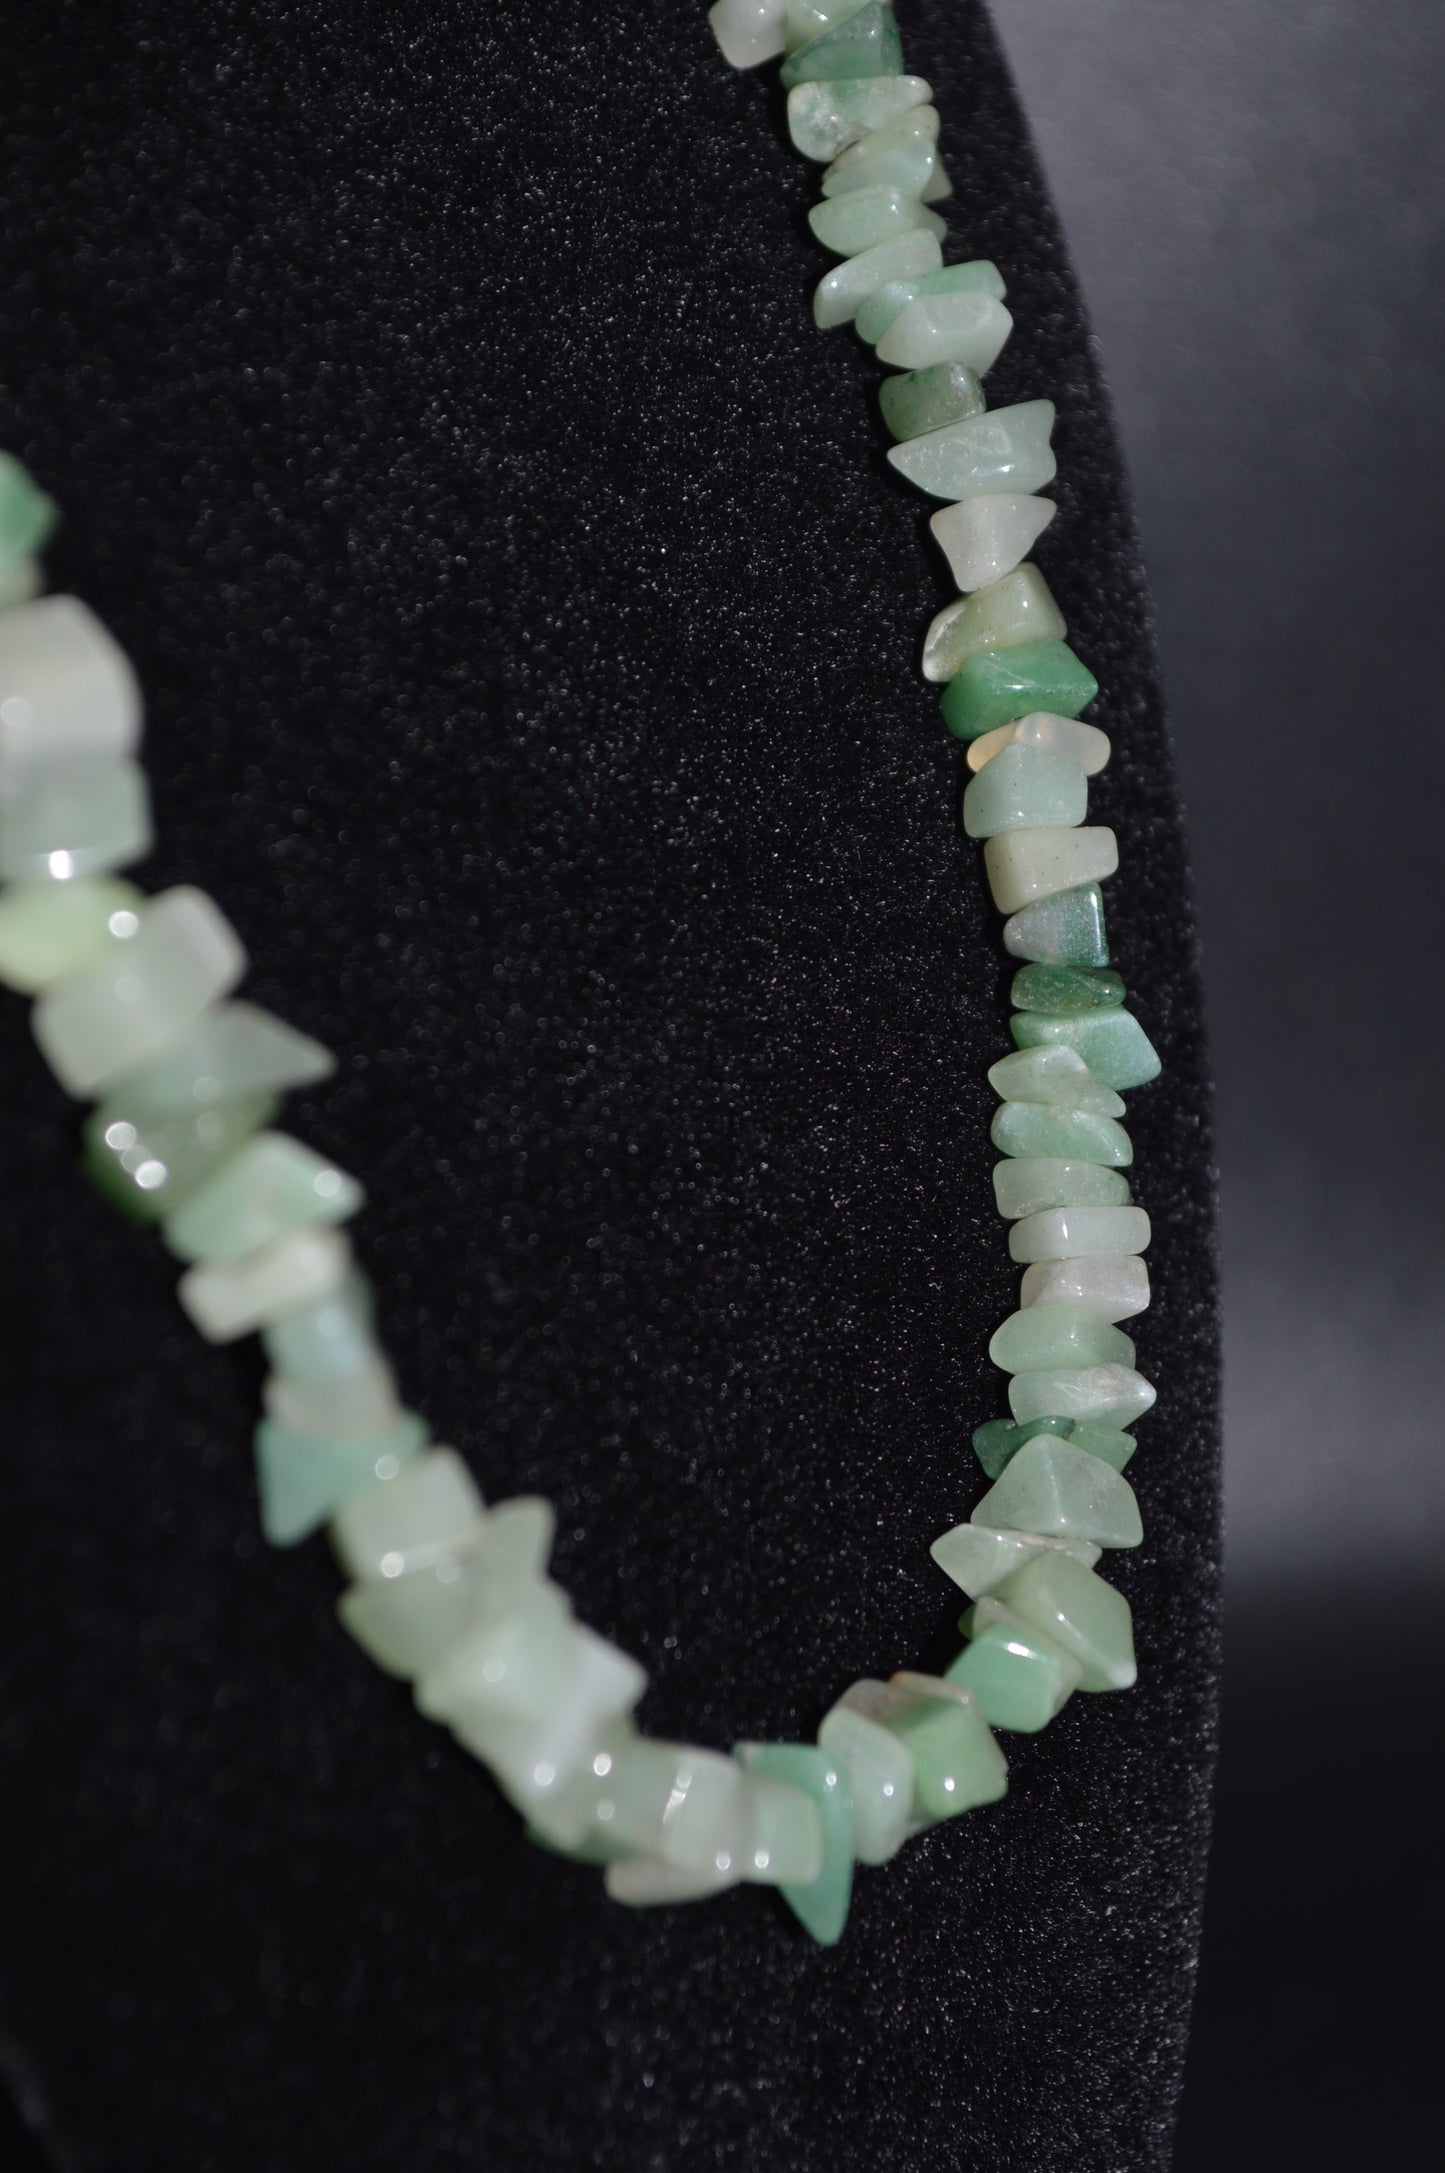 Aventurine Chips Necklace and Earring Set